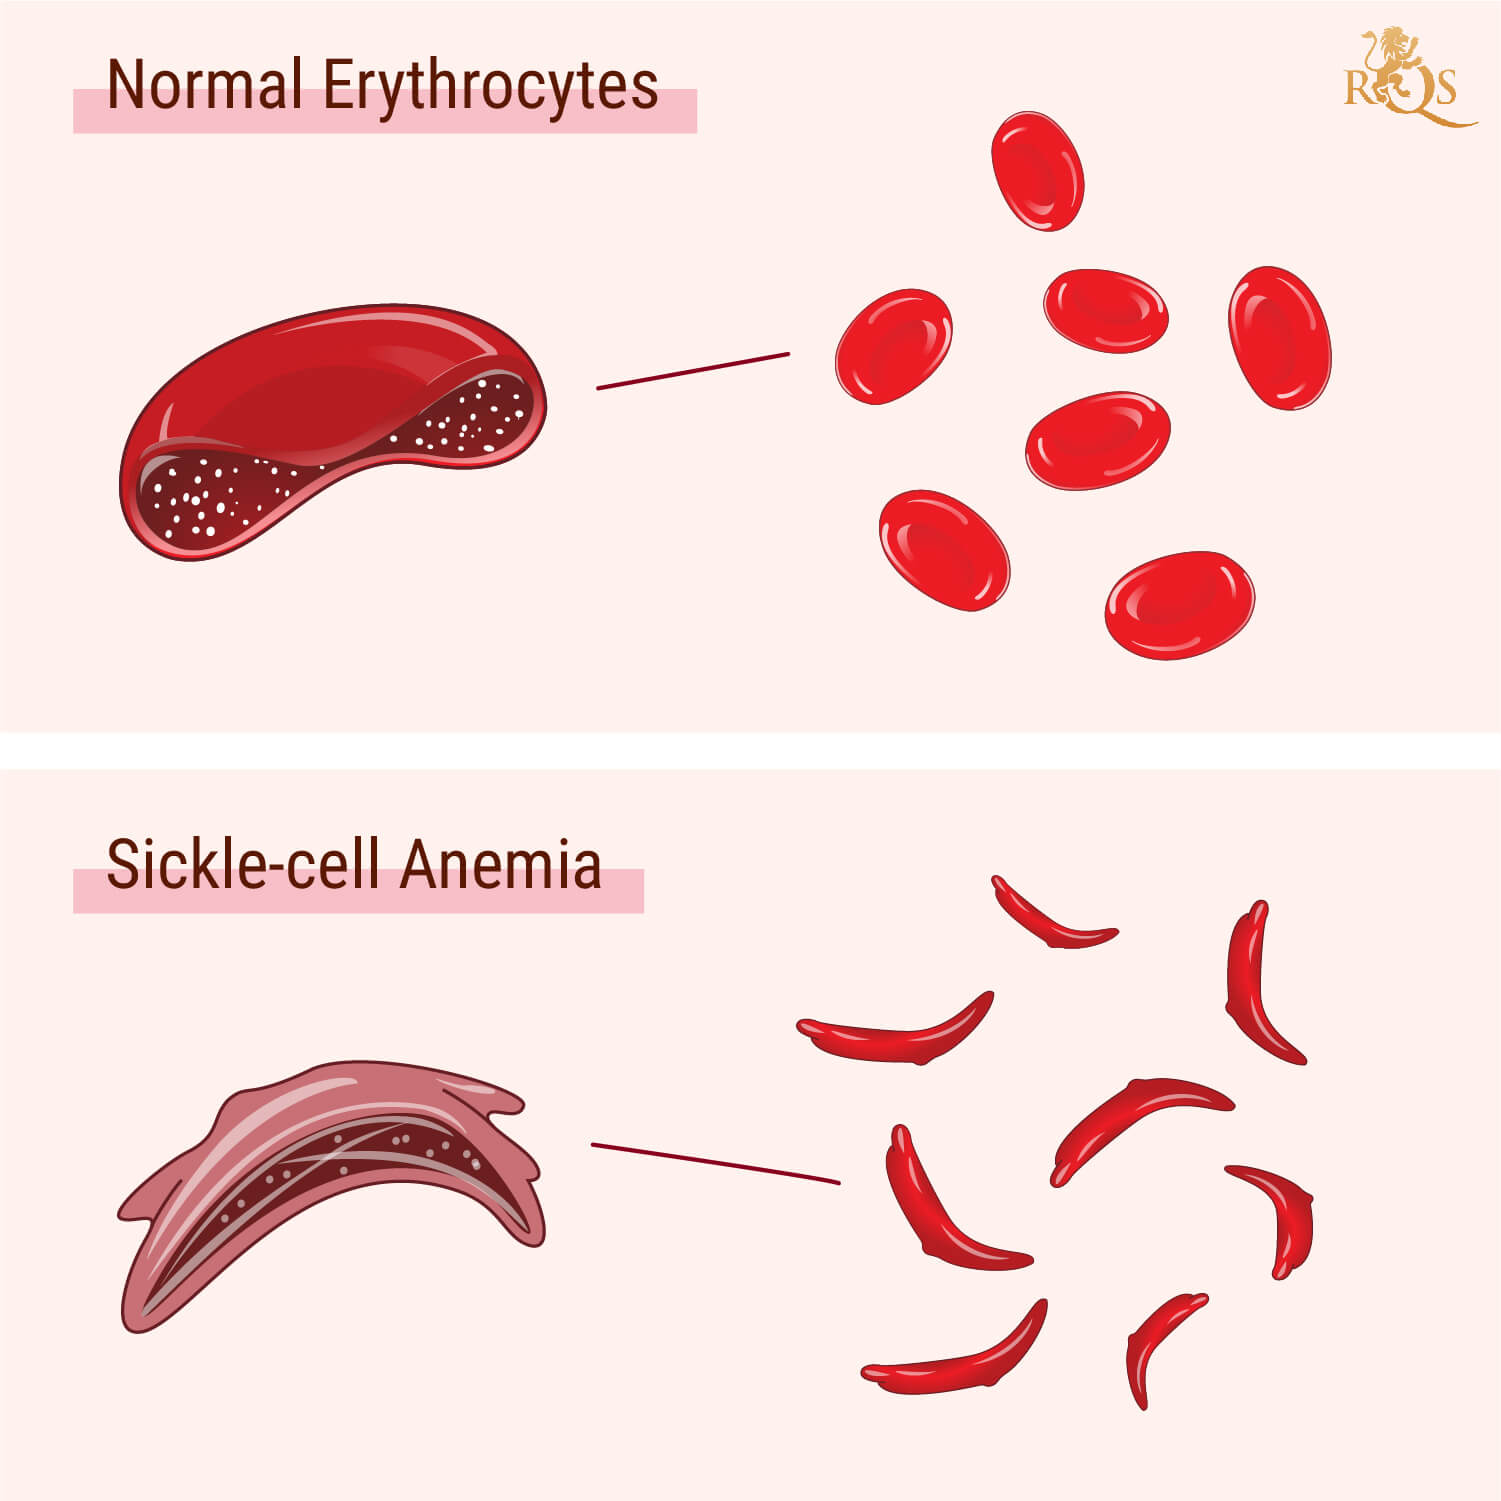 What Is Sickle Cell Anemia?